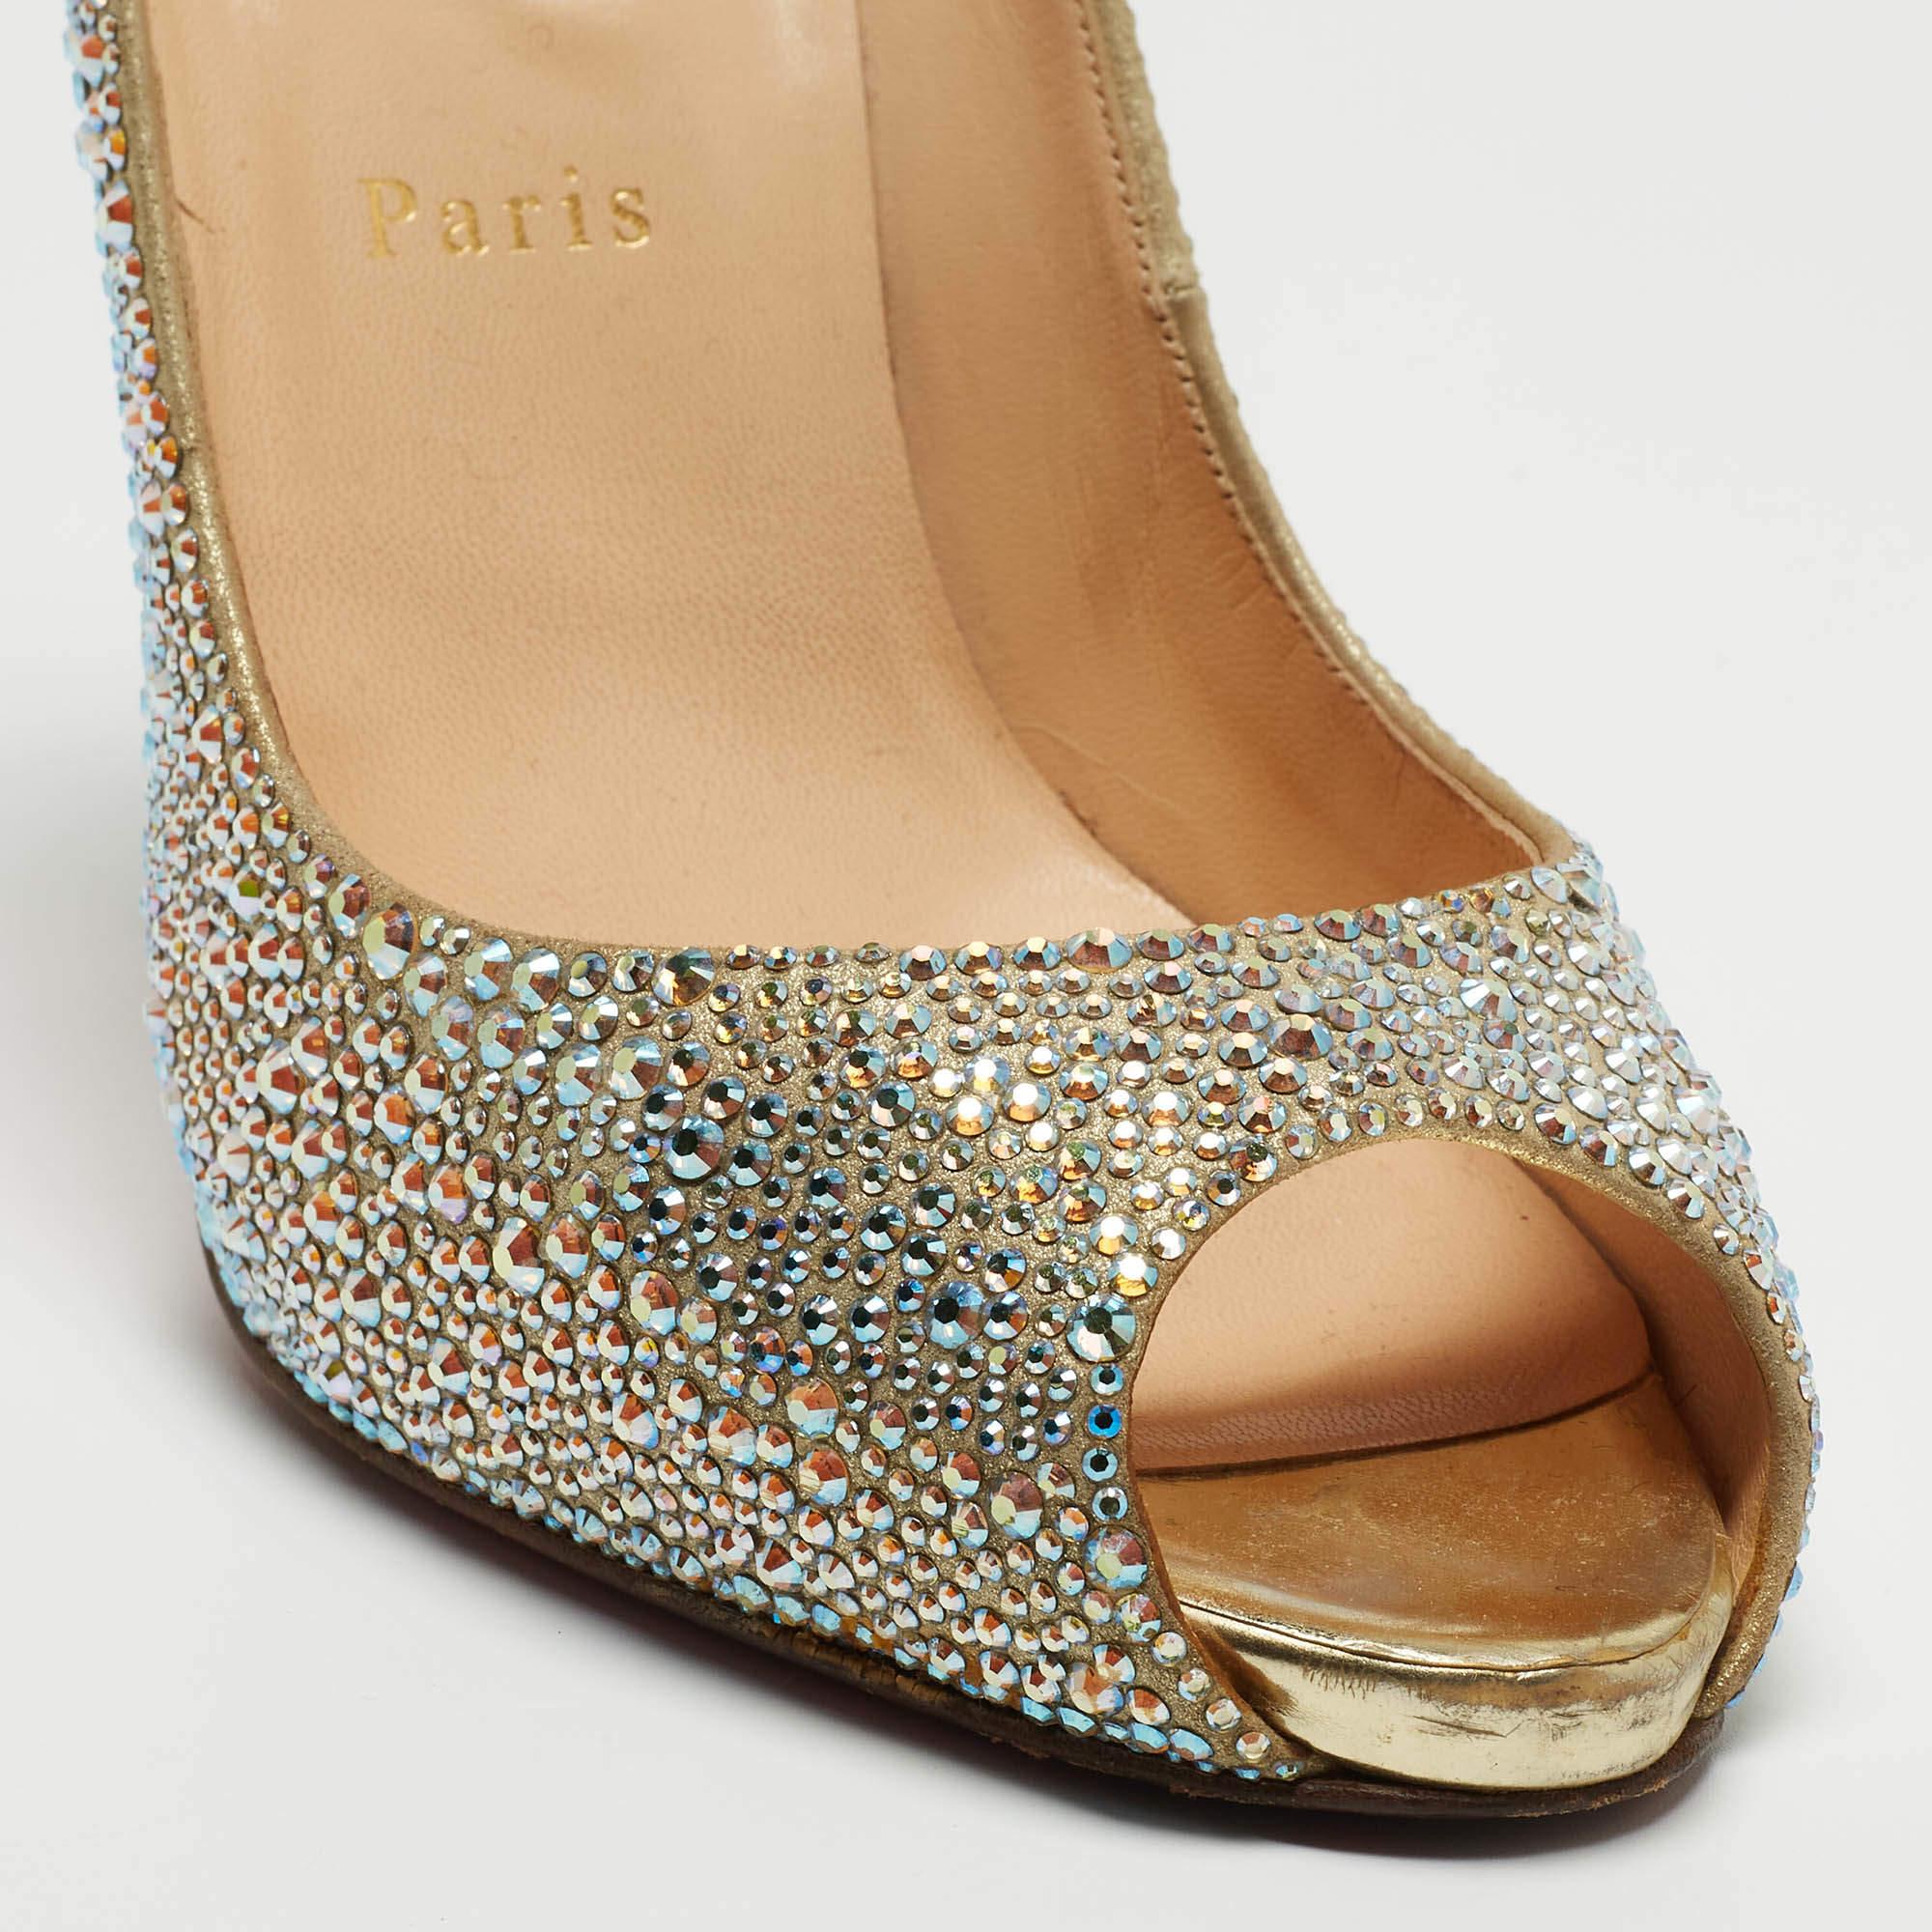 Perfectly sewn and finished to ensure an elegant look and fit, these Christian Louboutin crystal-embellished shoes are a purchase you'll love flaunting. They look great on the feet.

